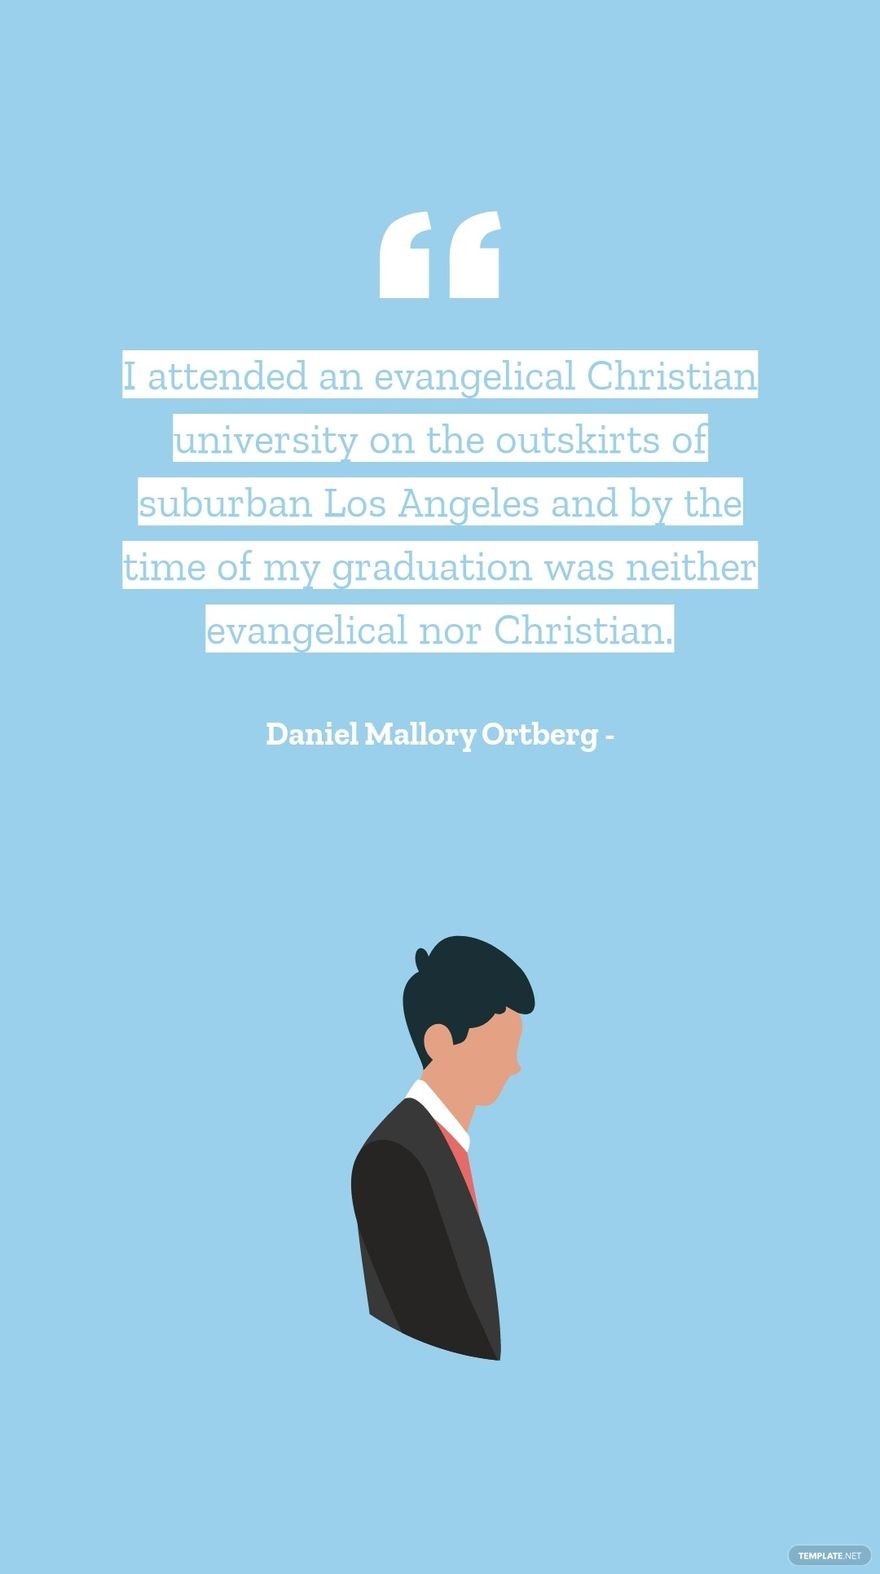 Daniel Mallory Ortberg - I attended an evangelical Christian university on the outskirts of suburban Los Angeles and by the time of my graduation was neither evangelical nor Christian.